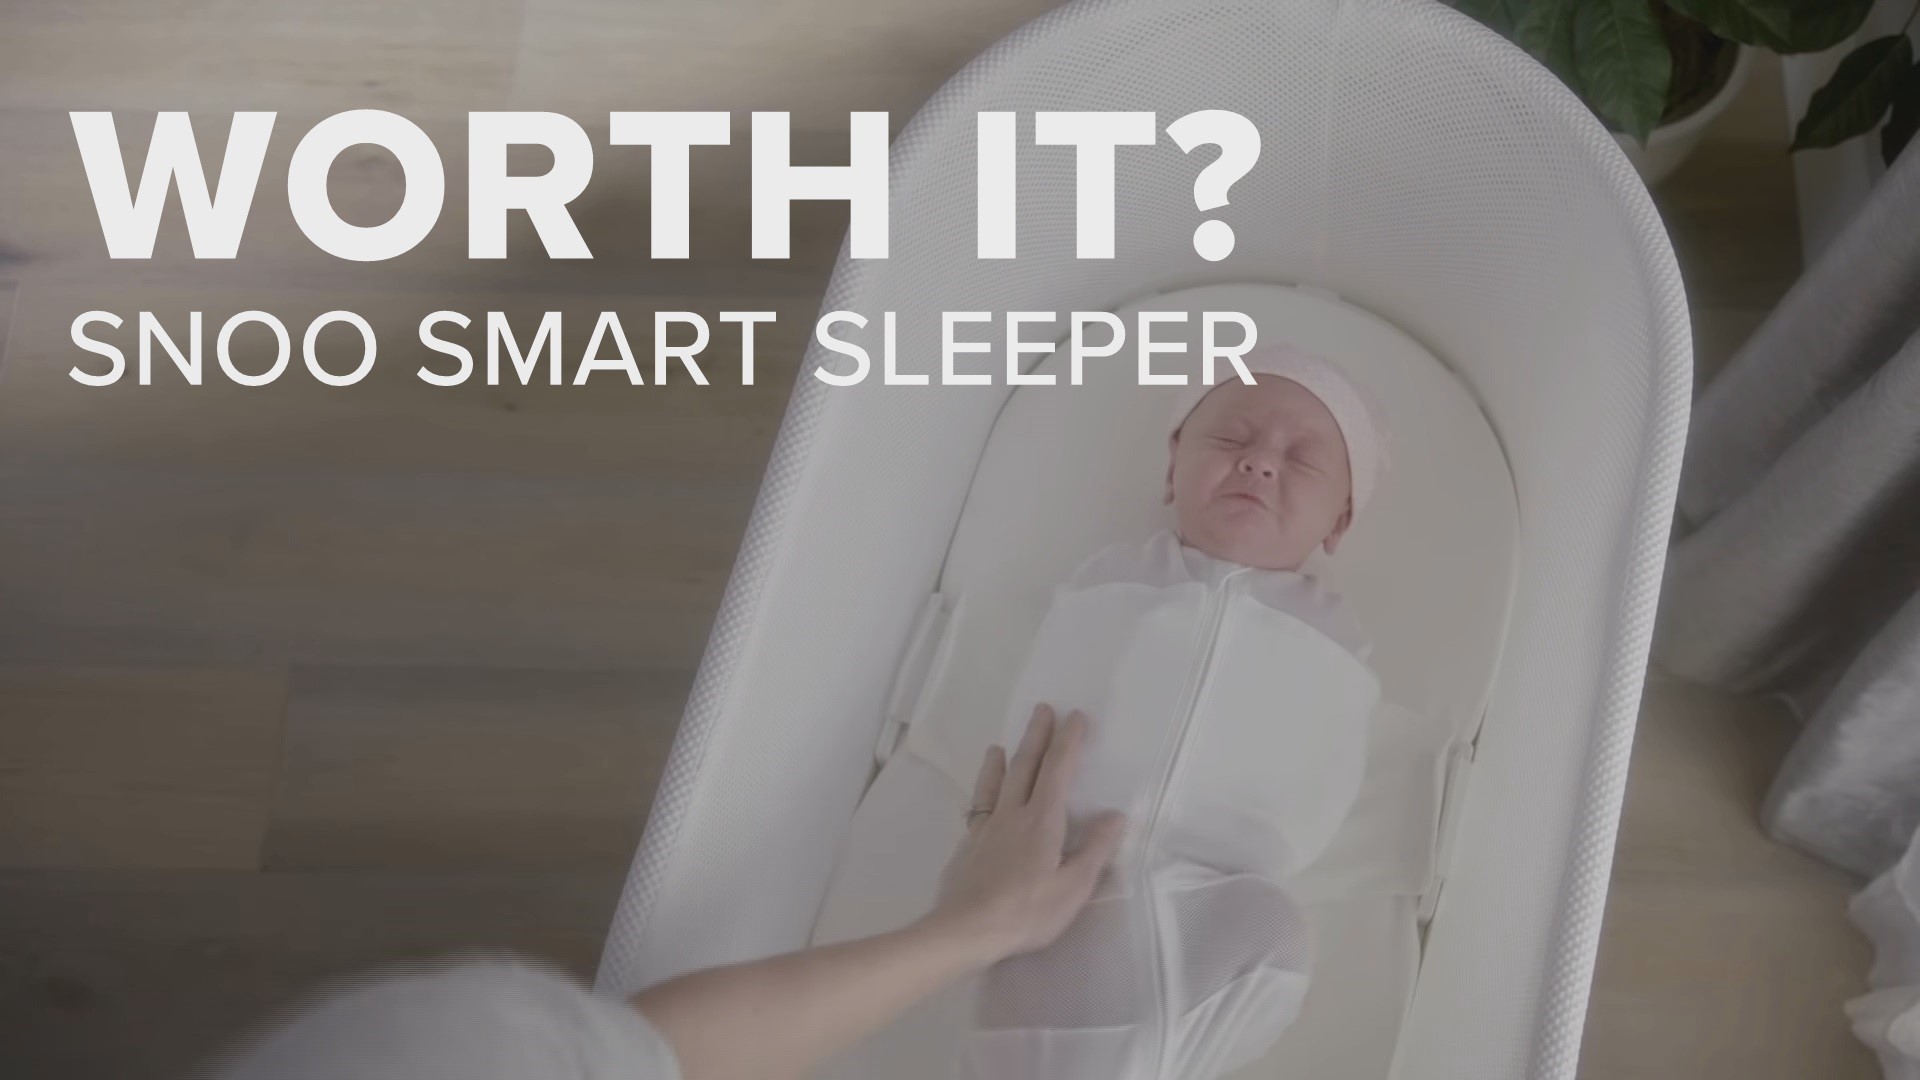 Local tech expert Ari Altman tests the SNOO Smart Sleeper and tells us if it's worth the price tag.